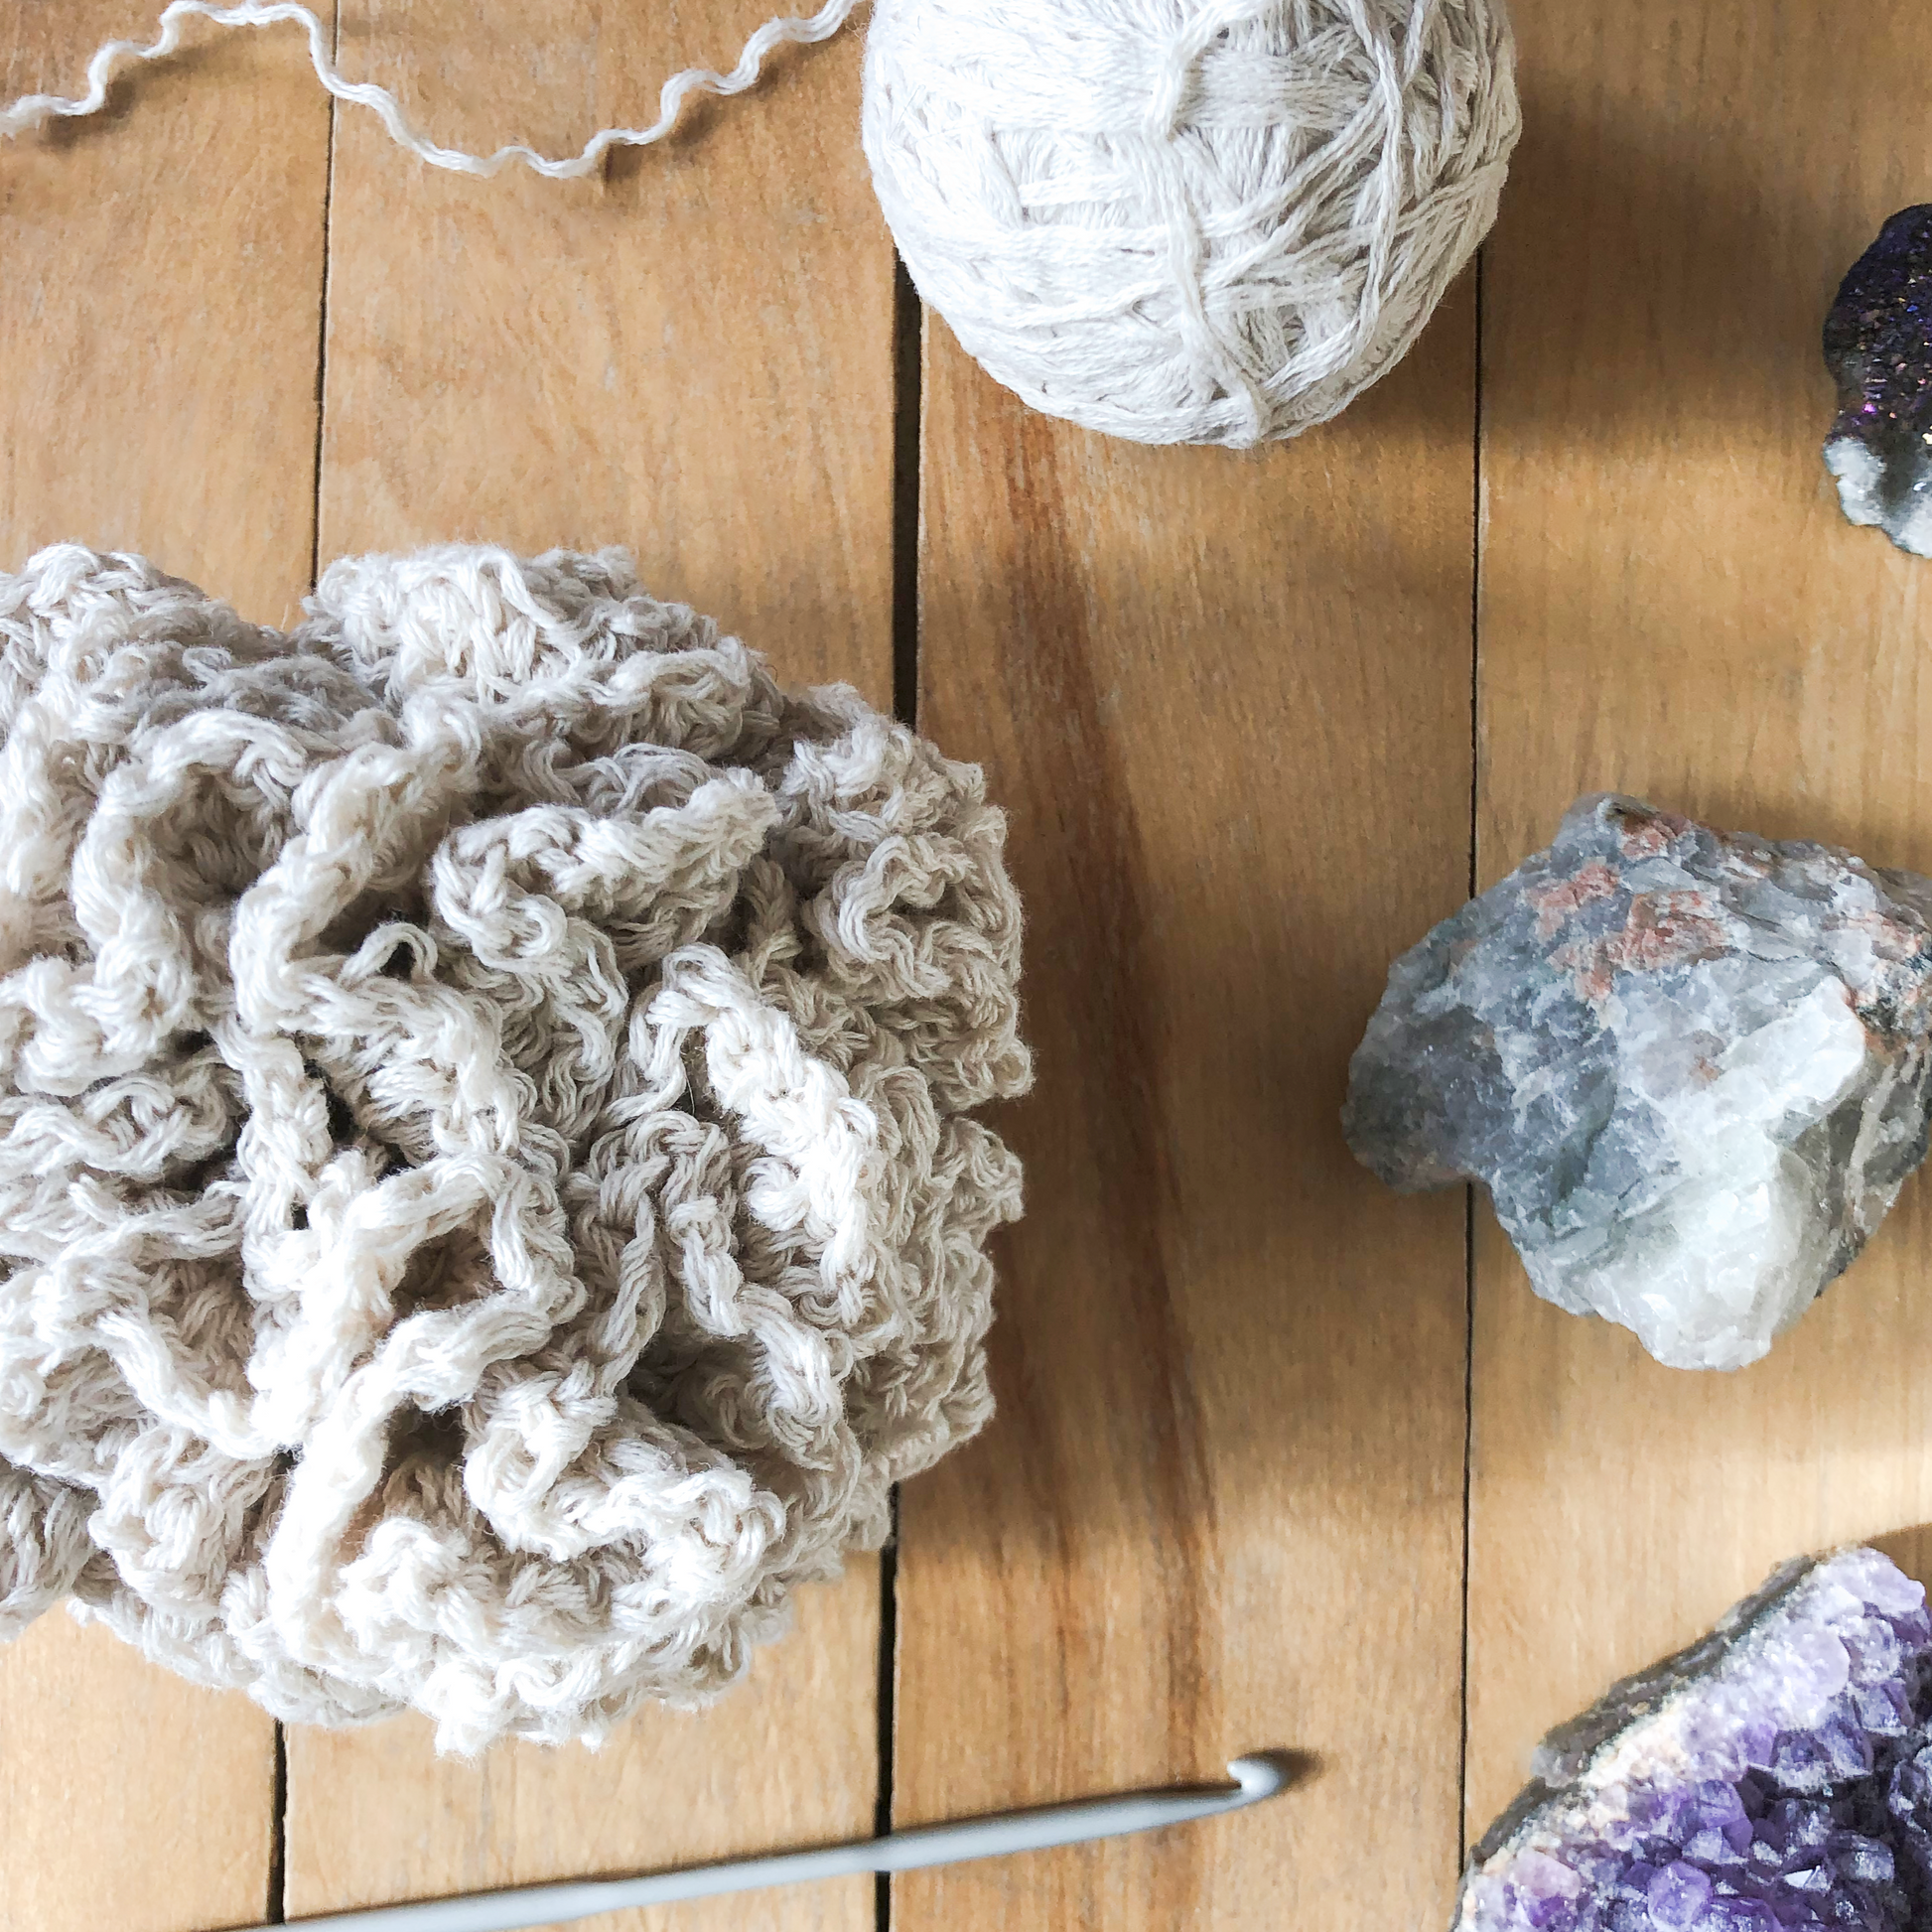 A size large crochet bath pouf, a ball of white cotton yarn, and gemstones lay against a wooden background. A metal crochet hook is laying beside the finished piece.